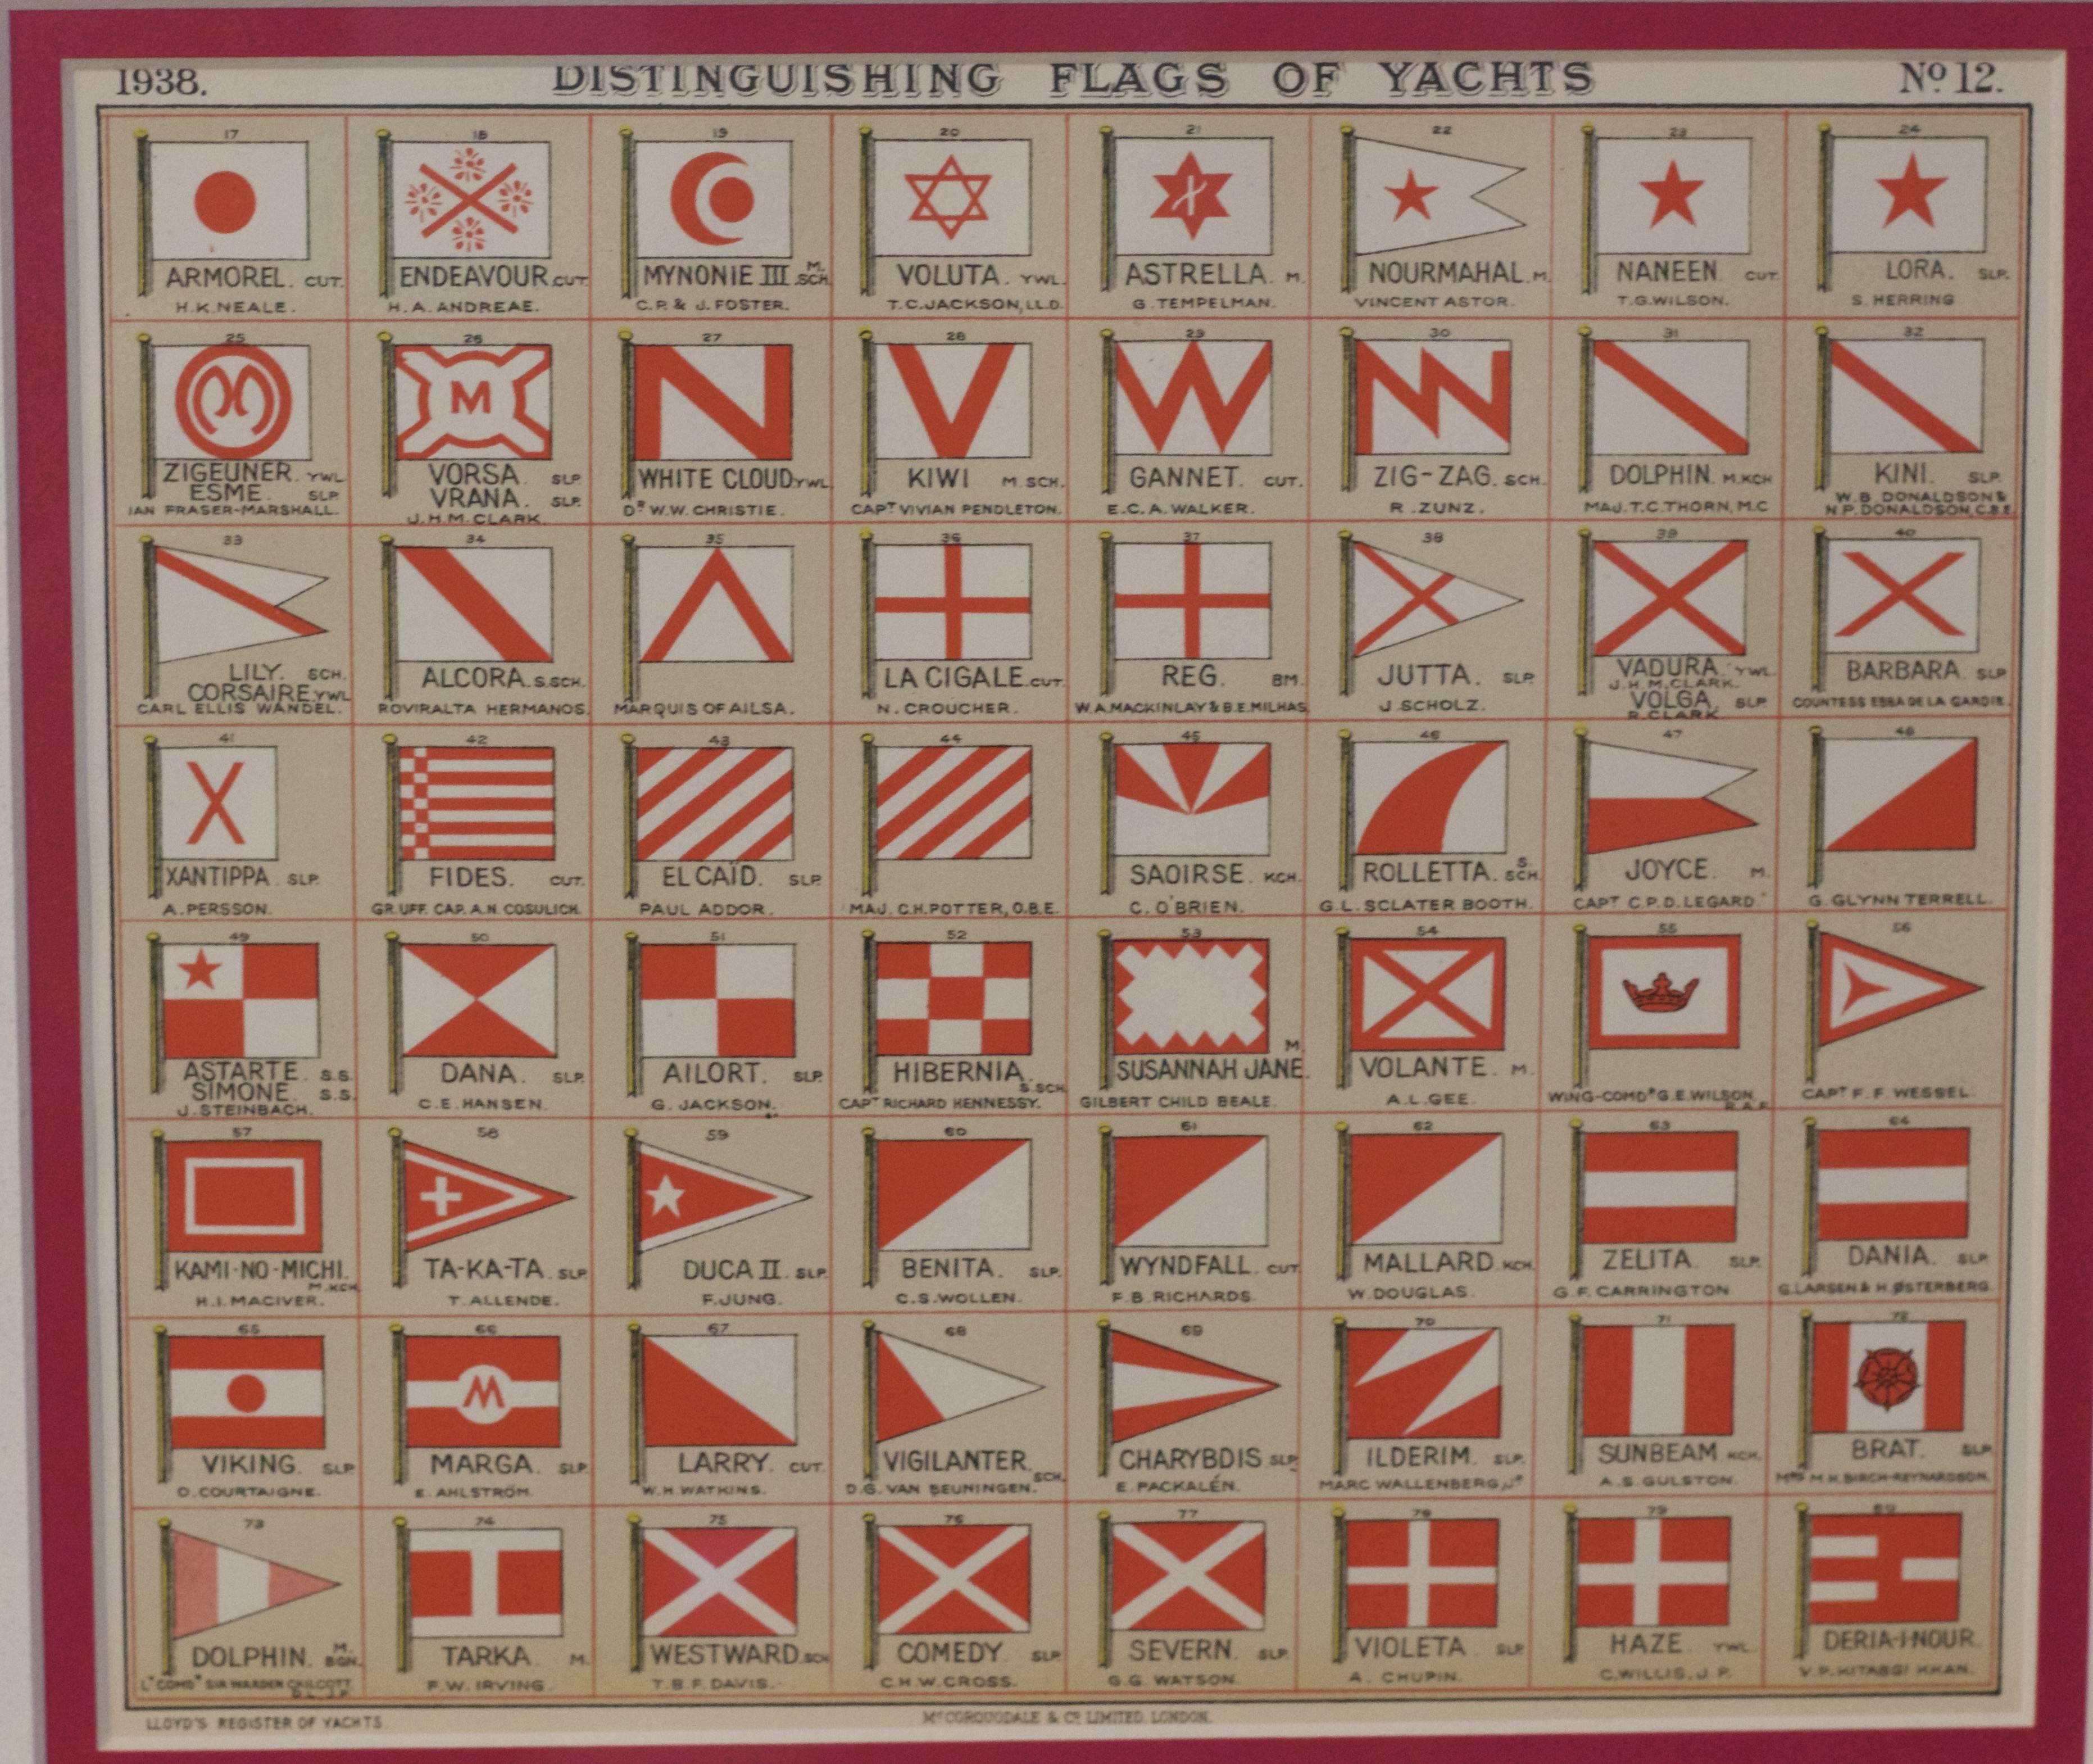 A framed page from Lloyd's register, circa 1938. Showing distinguishing flags of yachts. No 17 to 80. Color theme is red and white. Matted and framed. Dimensions: 12" H x 13.5" L.